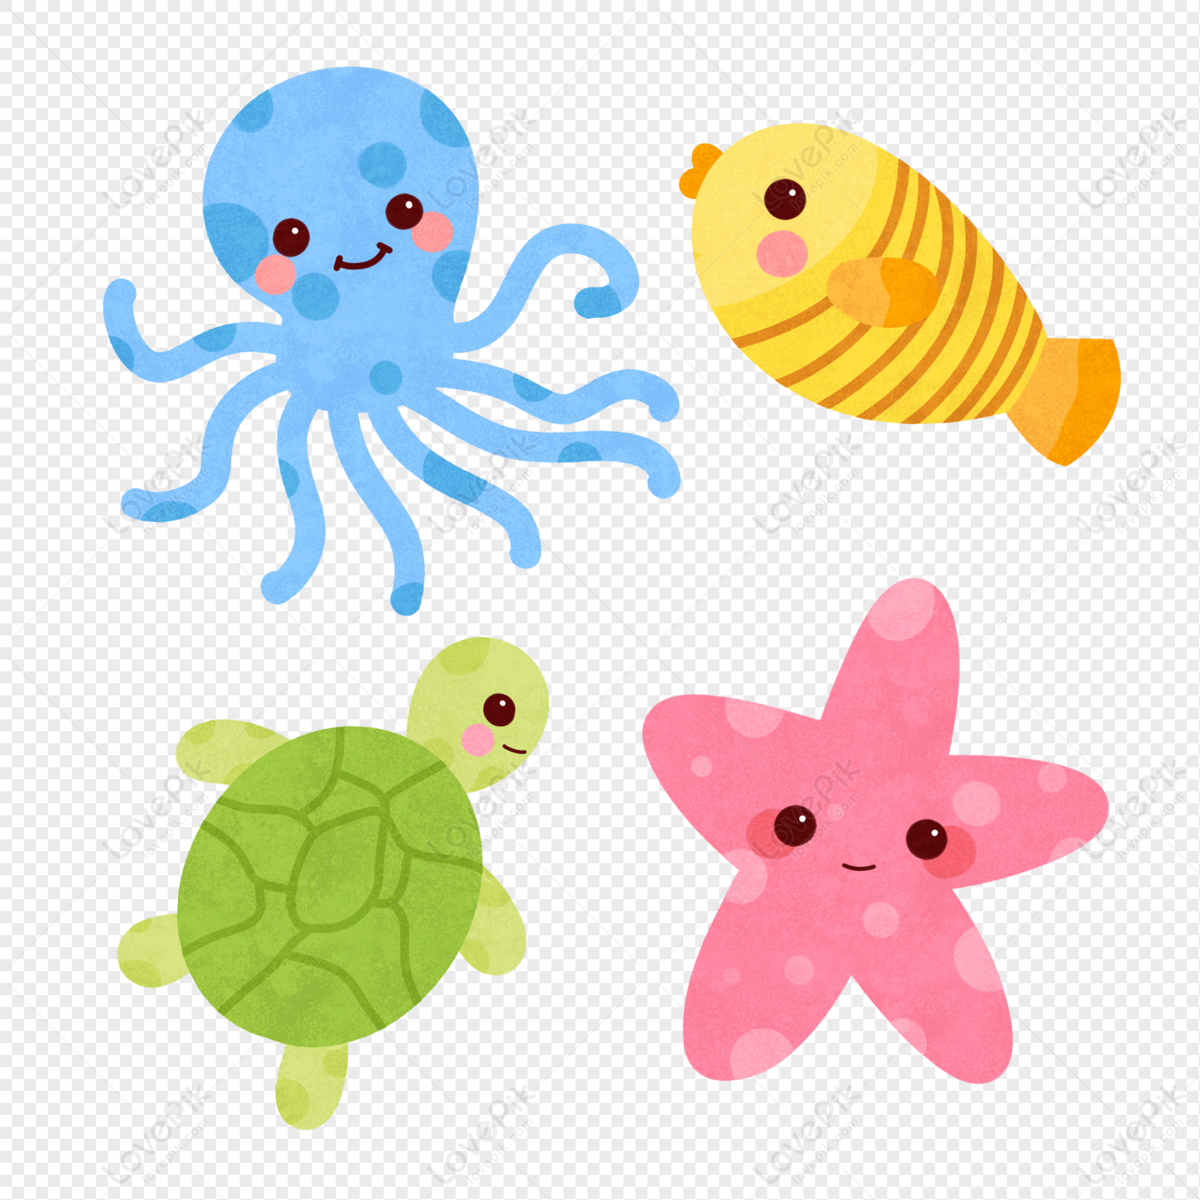 Cute Sea Animals PNG Transparent And Clipart Image For Free Download -  Lovepik | 401244916